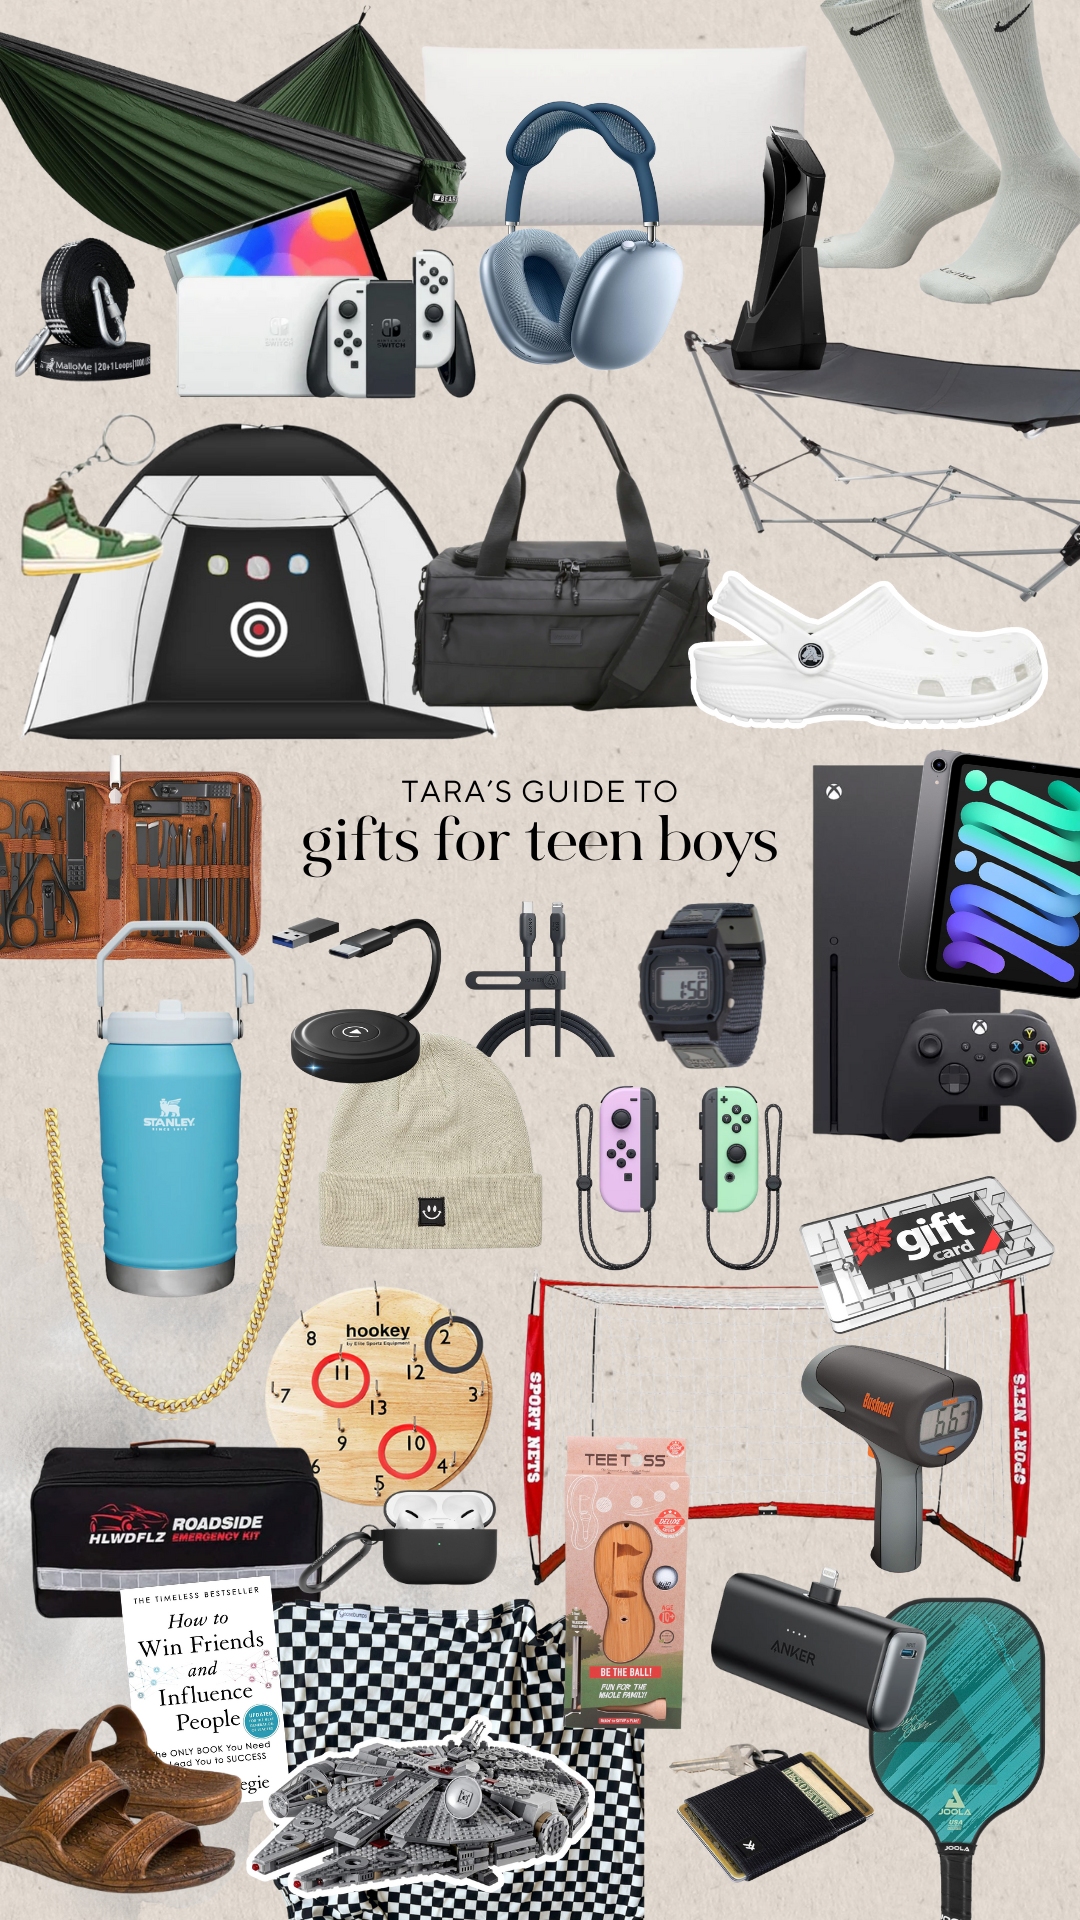 Best Christmas gifts for boaters: 57 ideas for the person who's got it all